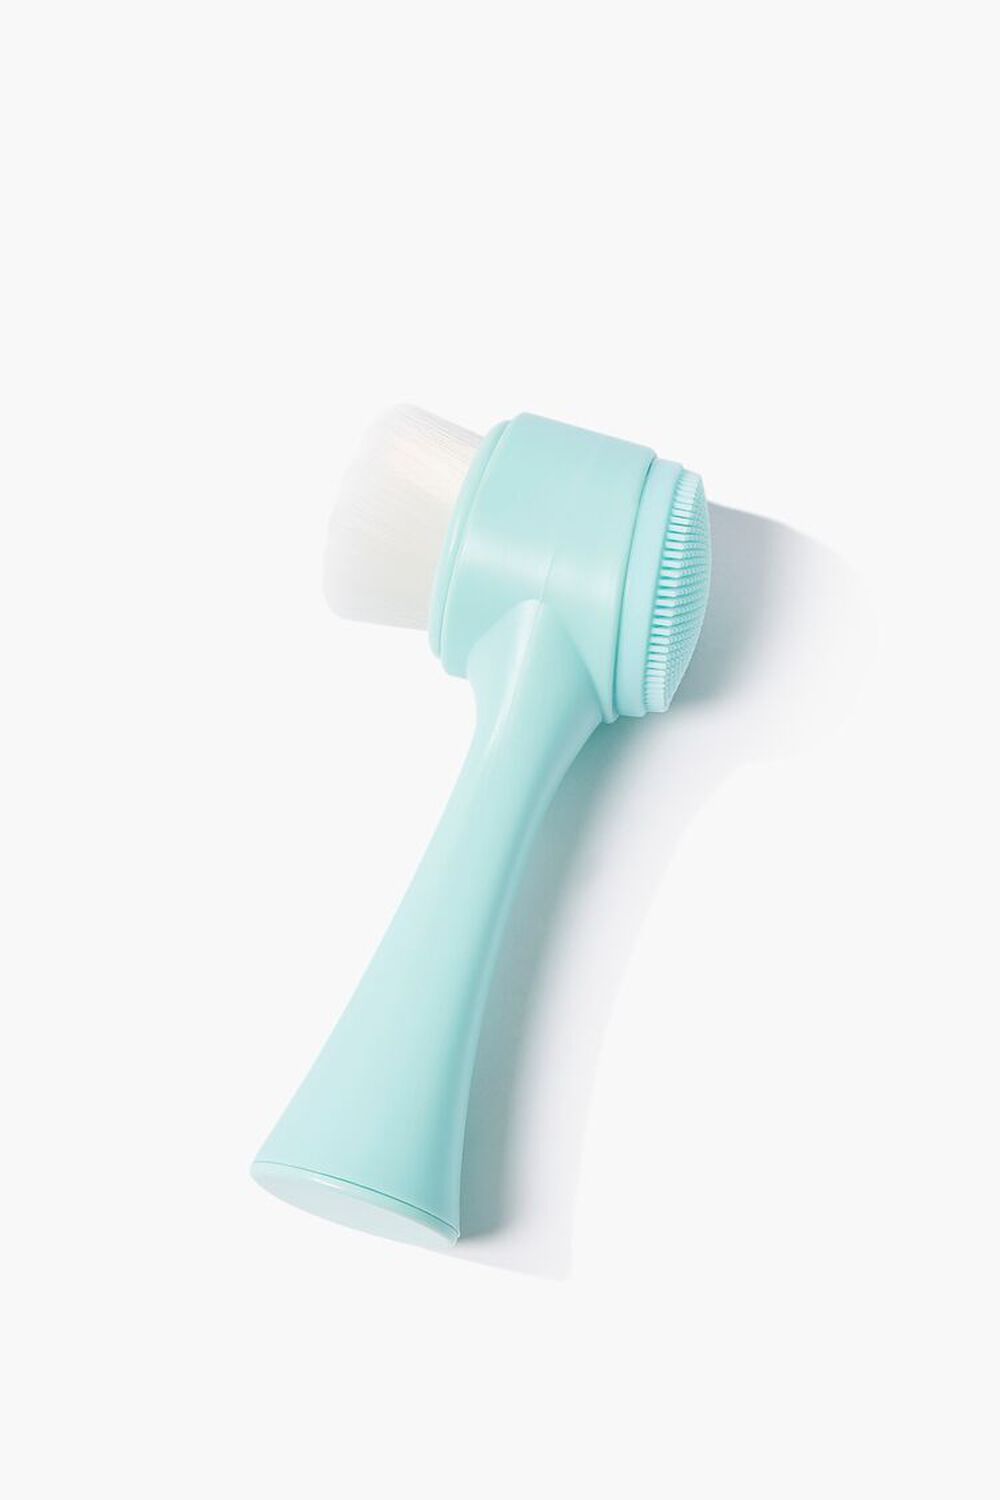 MINT Dual-Sided Cleansing Face Brush, image 1